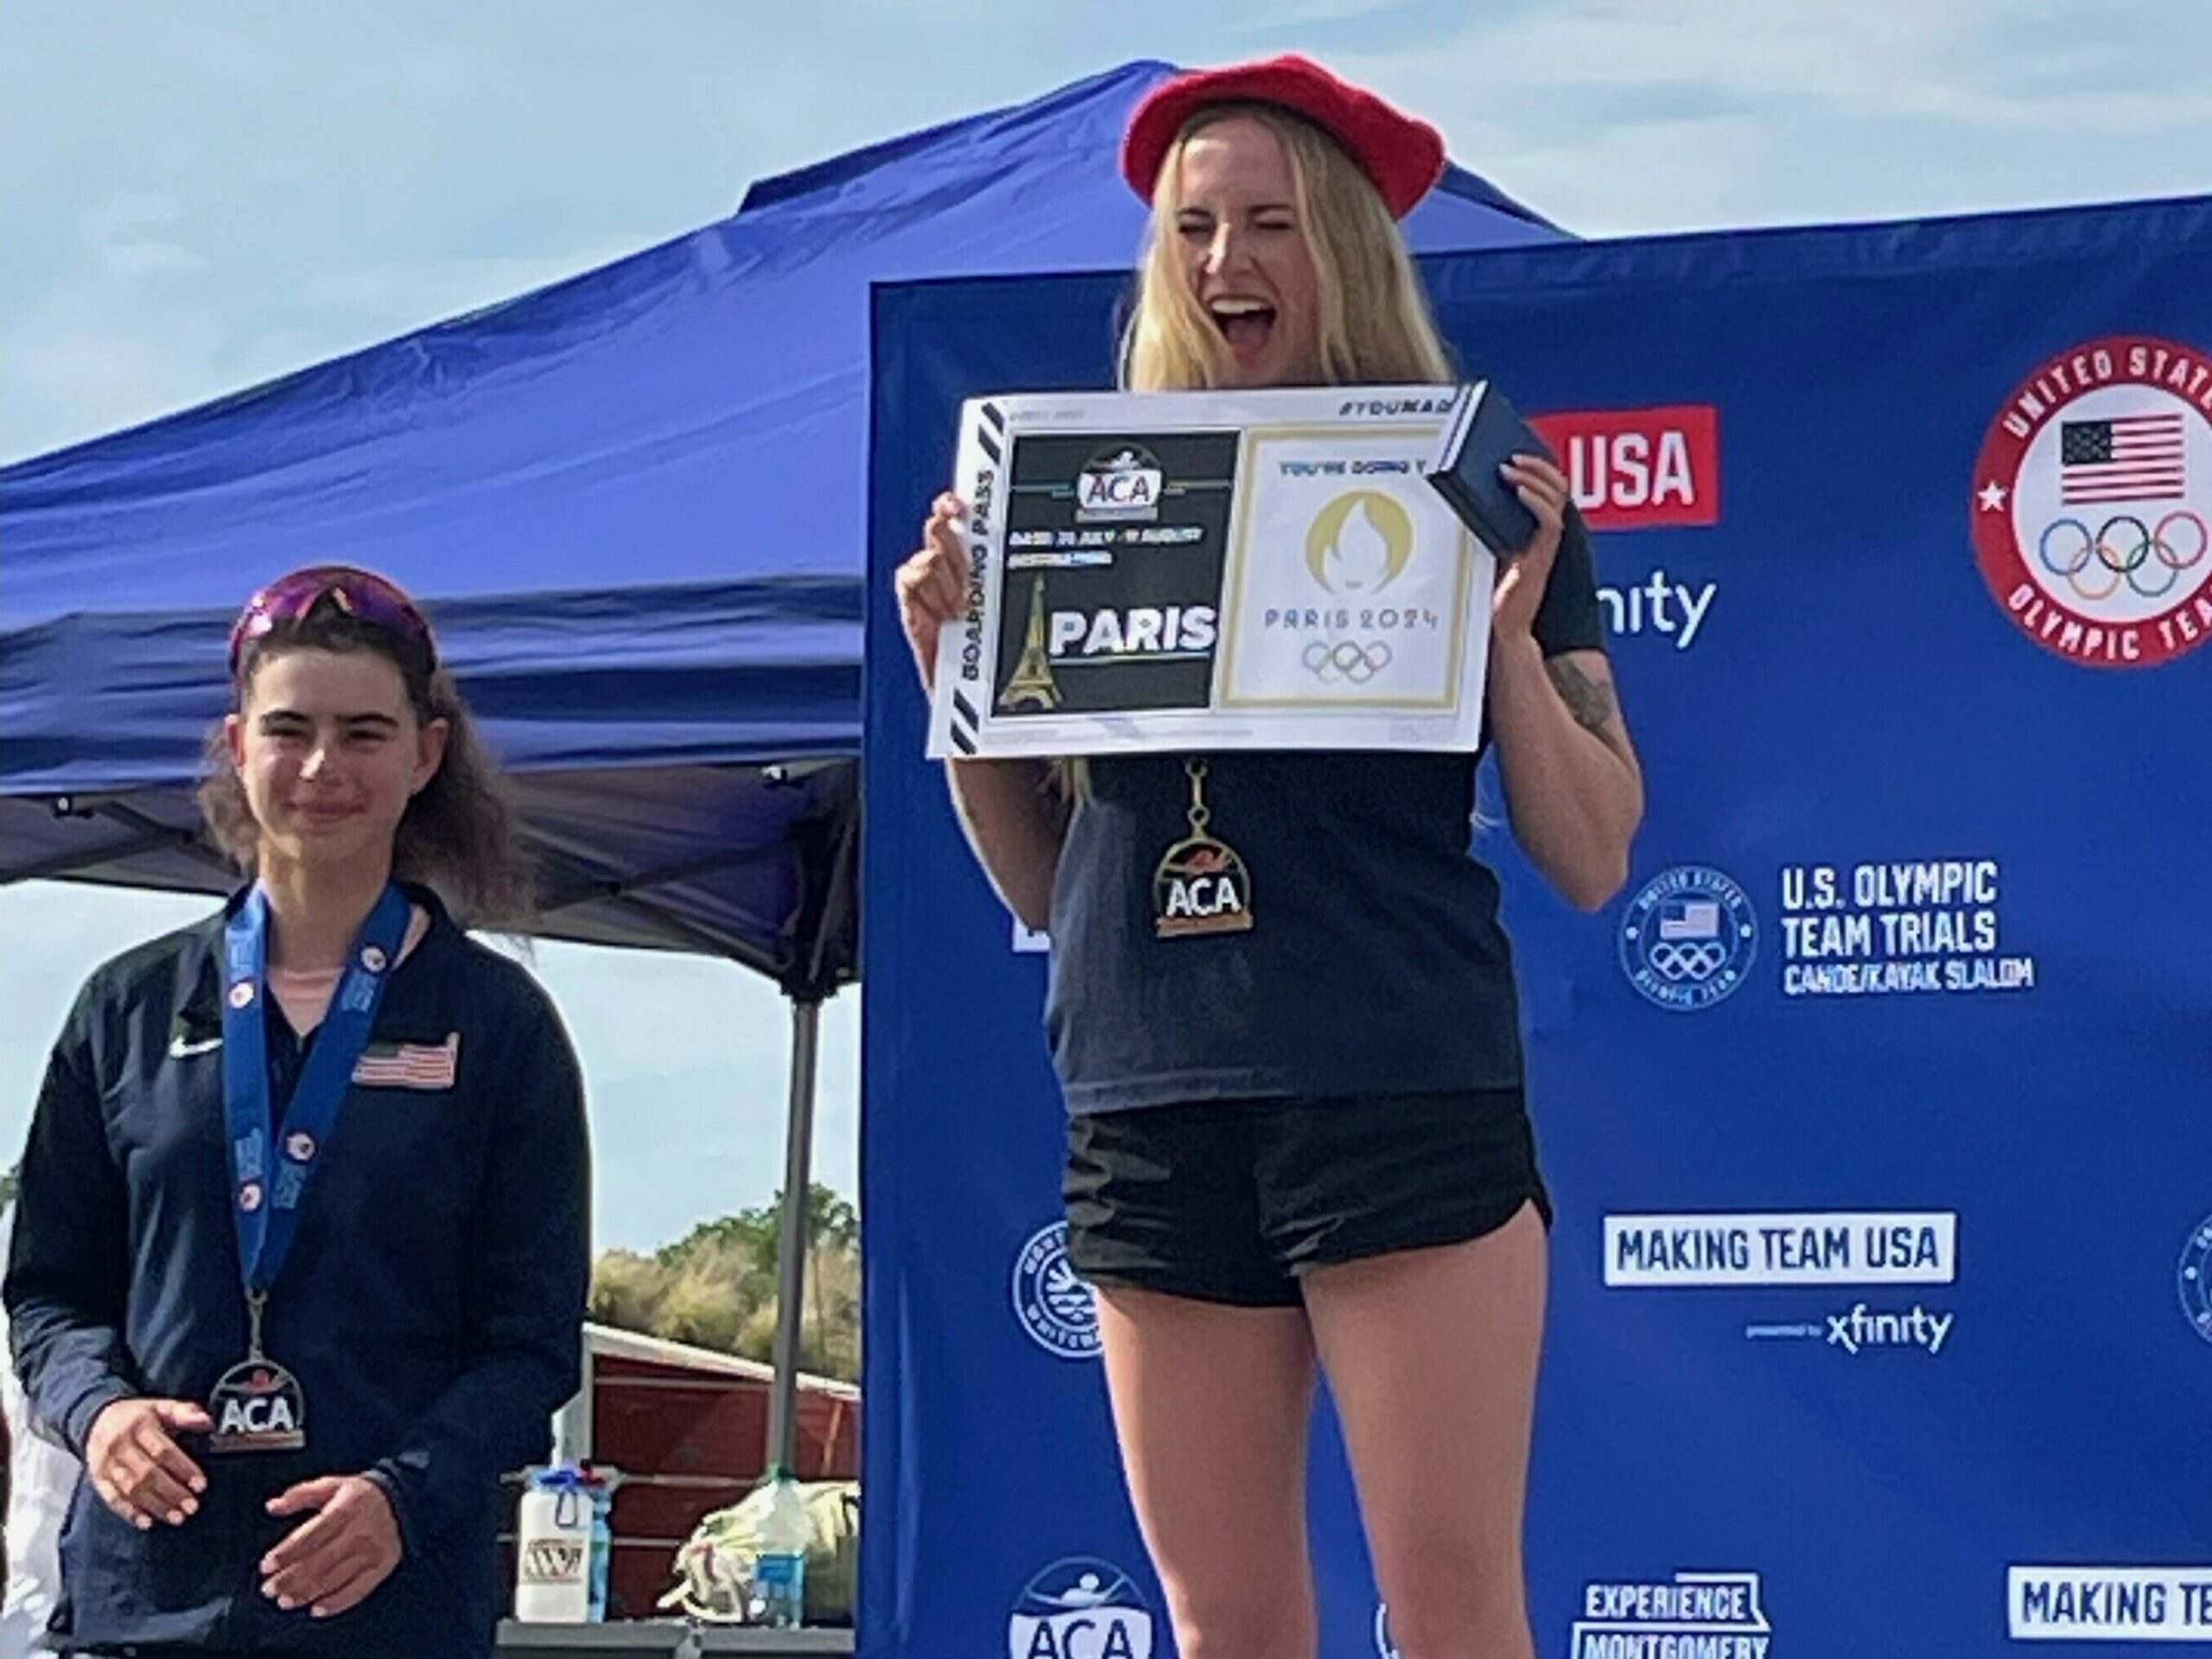 At the U.S. Olympic trials in Montgomery, Evy Leibfarth wins a spot to represent USA in women's canoe slalom for the 2024 Paris Olympics this summer.